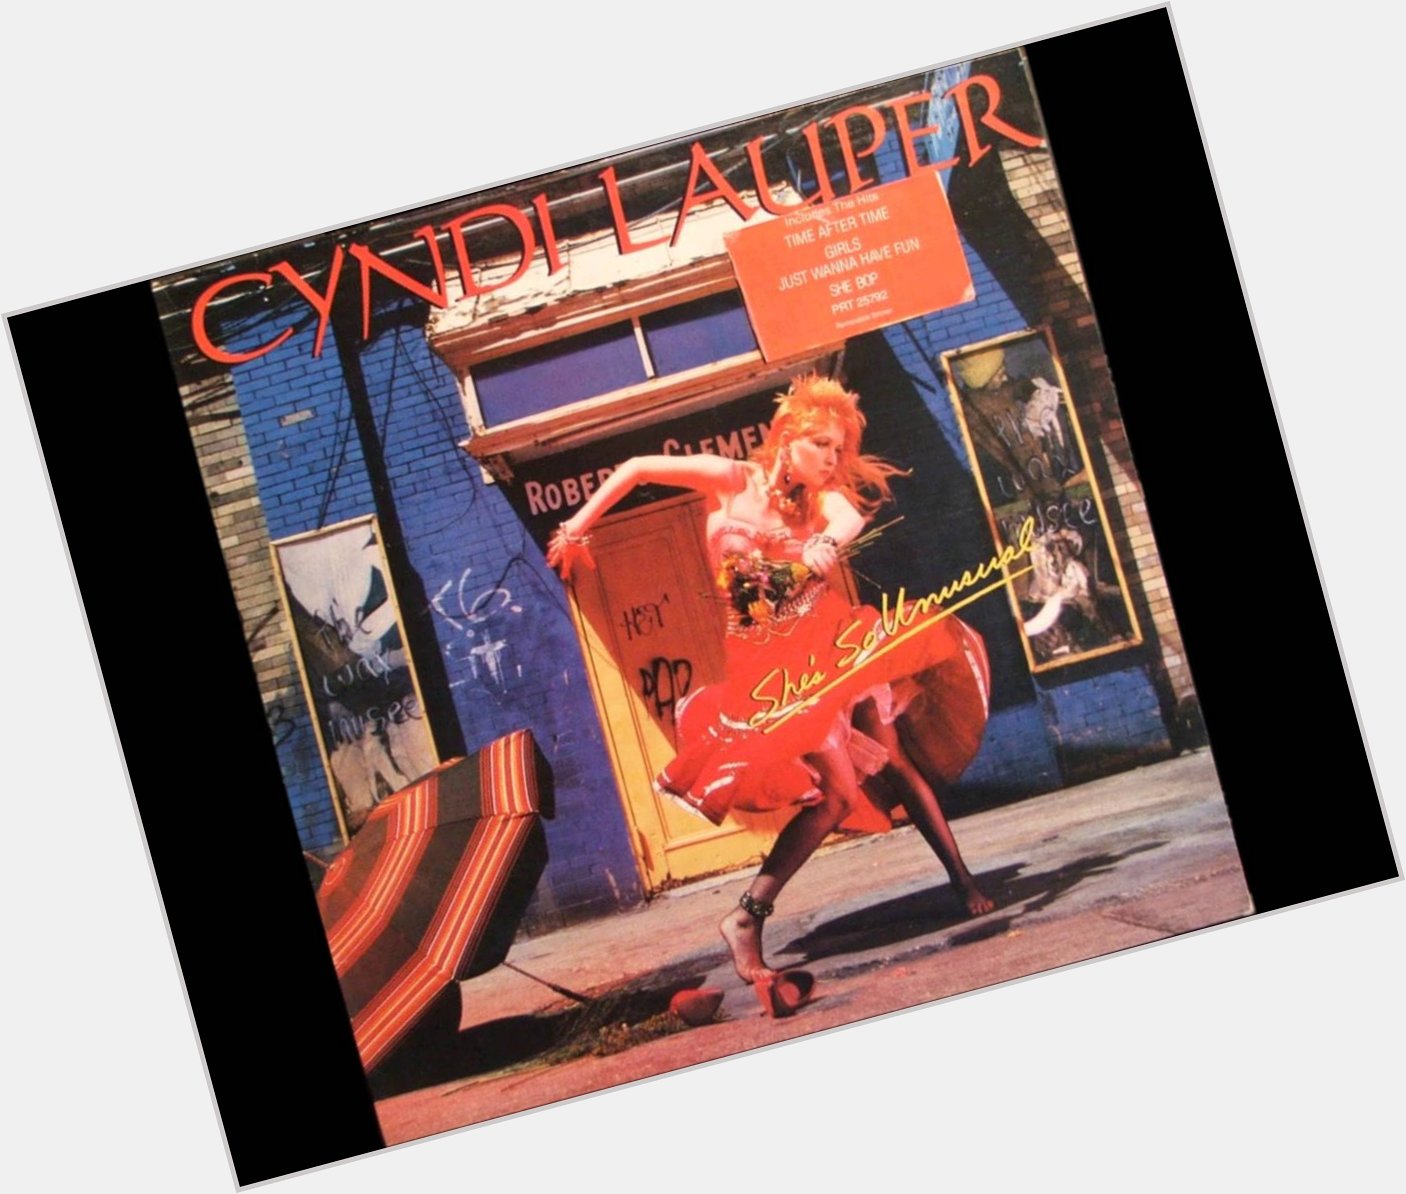  Happy birthday Cyndi Lauper. Which of her songs is your favorite? 